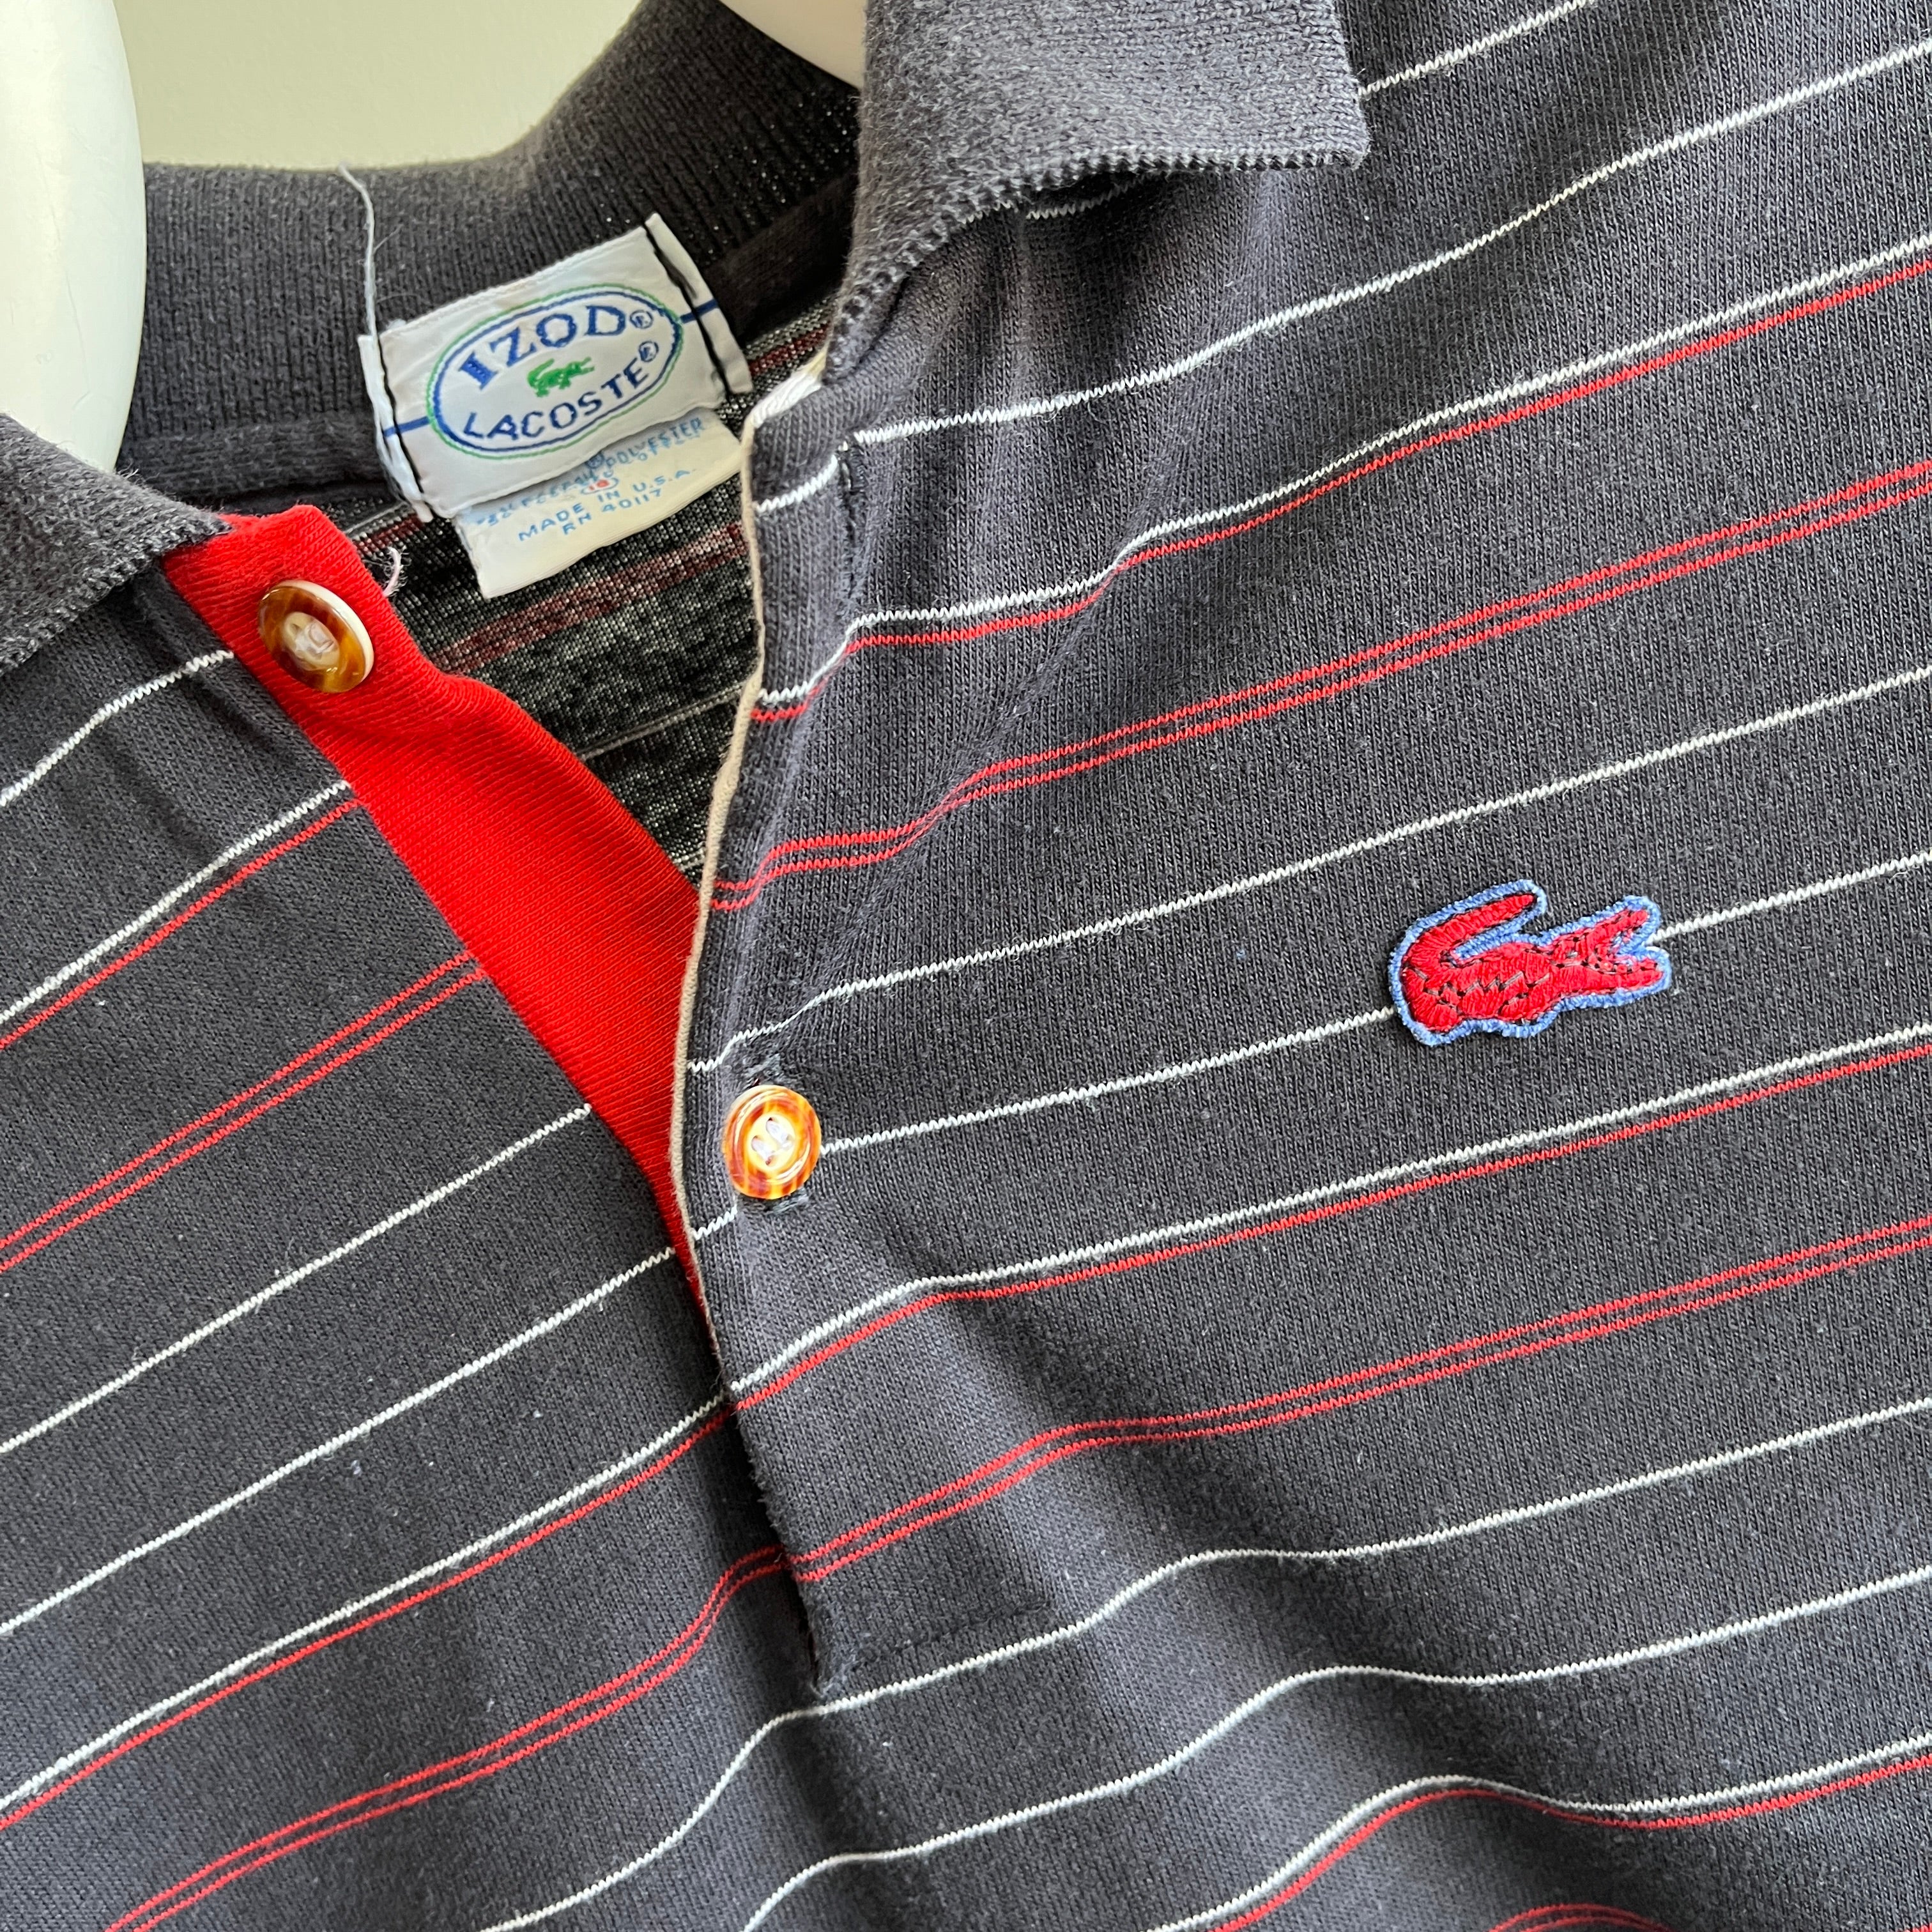 GG - 1980s IZOD Lacoste Long Sleeve Striped Polo Shirt - Smaller Size